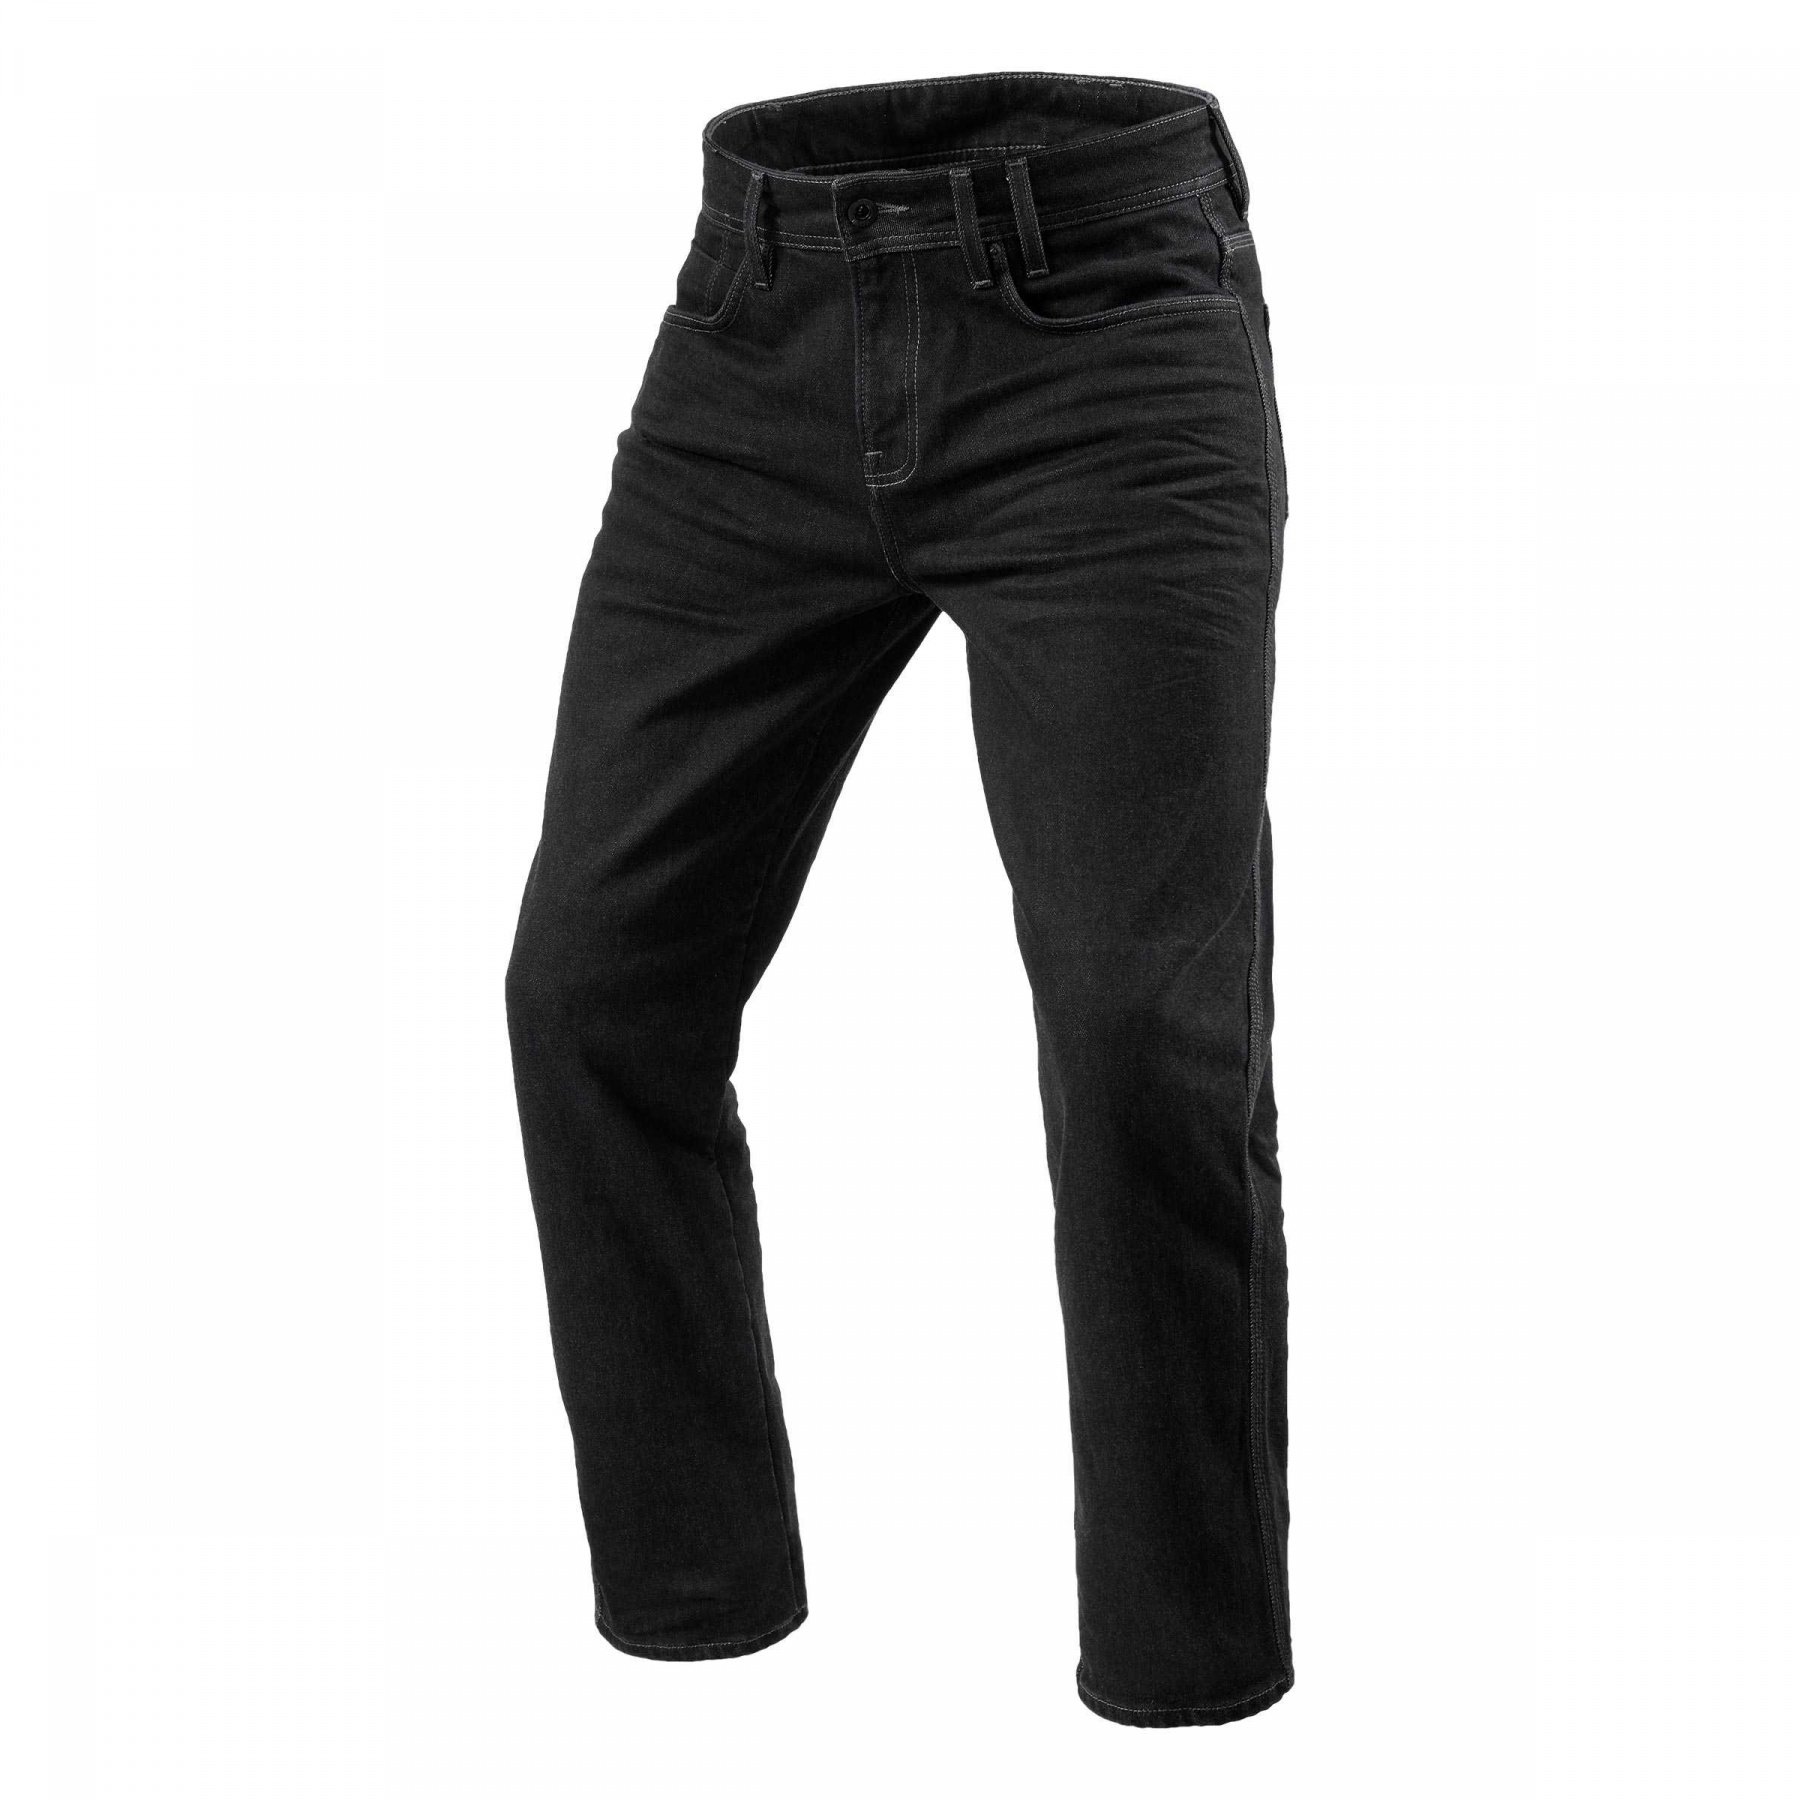 Image of REV'IT! Jeans Lombard 3 RF Dark Blue Used Motorcycle Jeans Size L36/W33 ID 8700001338448